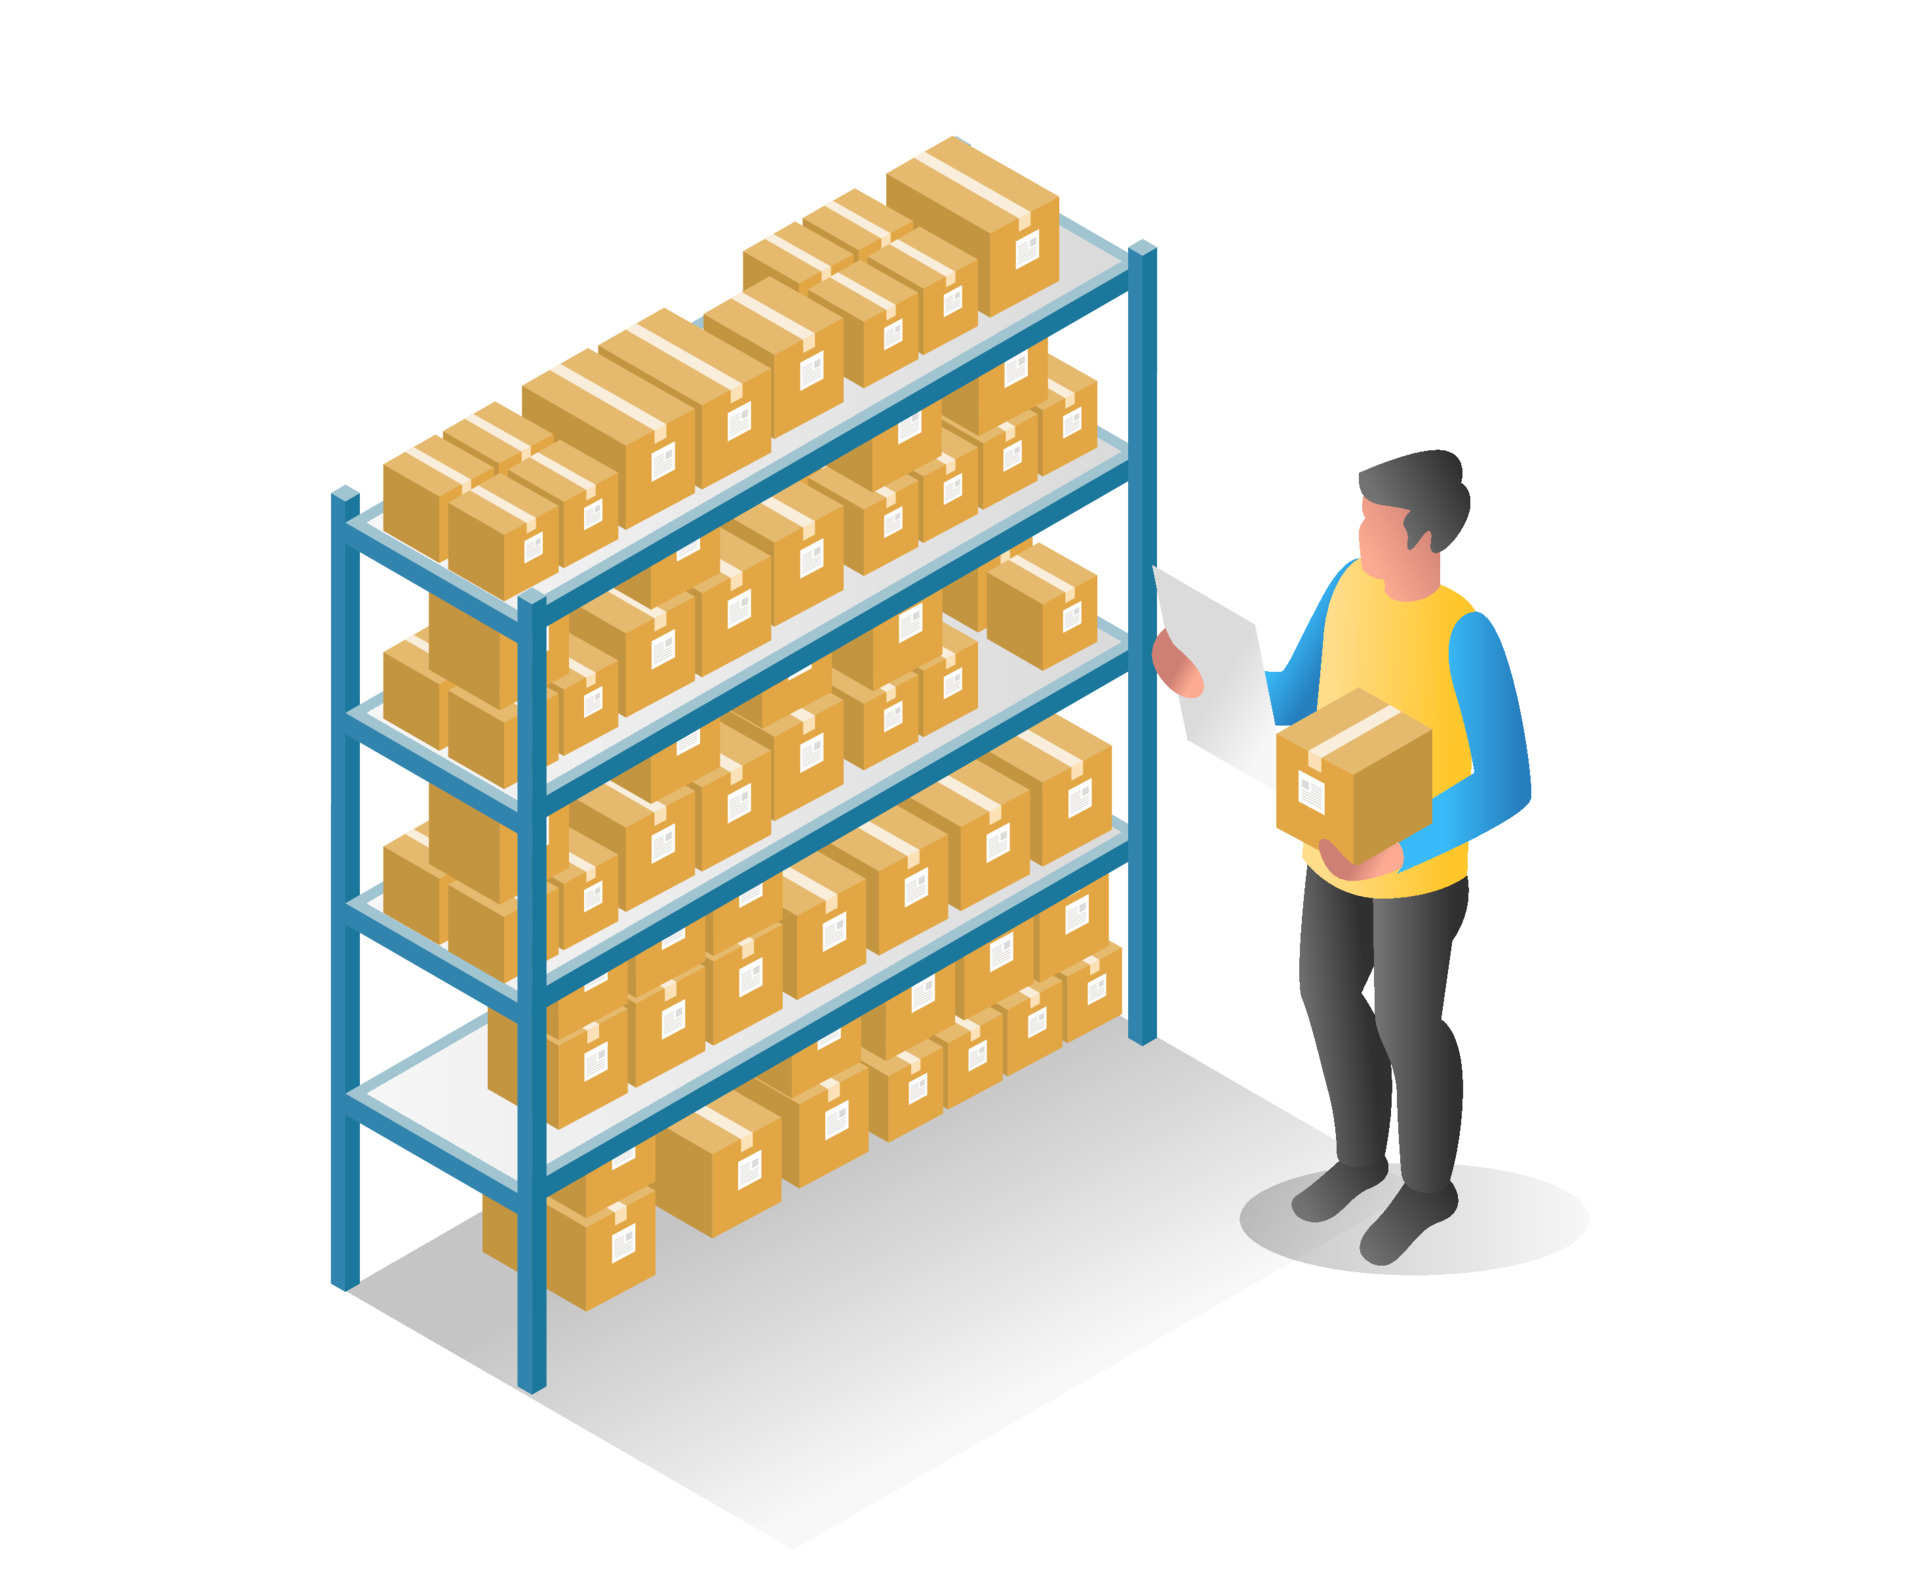 vecteezy_flat-isometric-illustration-concept-man-checking-stock-in_7885797